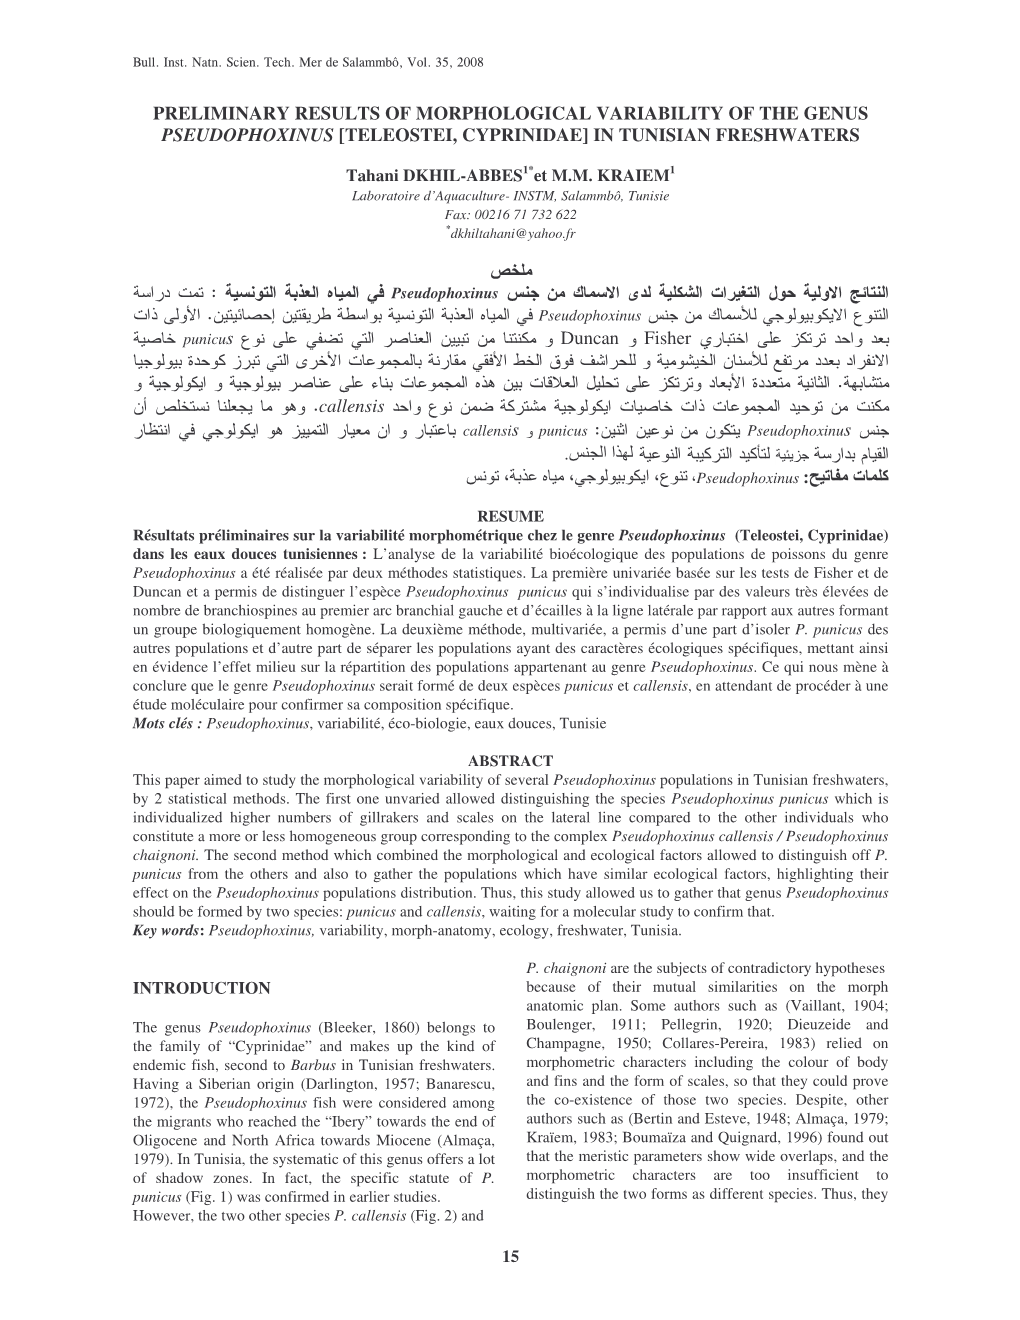 Preliminary Results of Morphological Variability of the Genus Pseudophoxinus [Teleostei, Cyprinidae] in Tunisian Freshwaters ﻤ